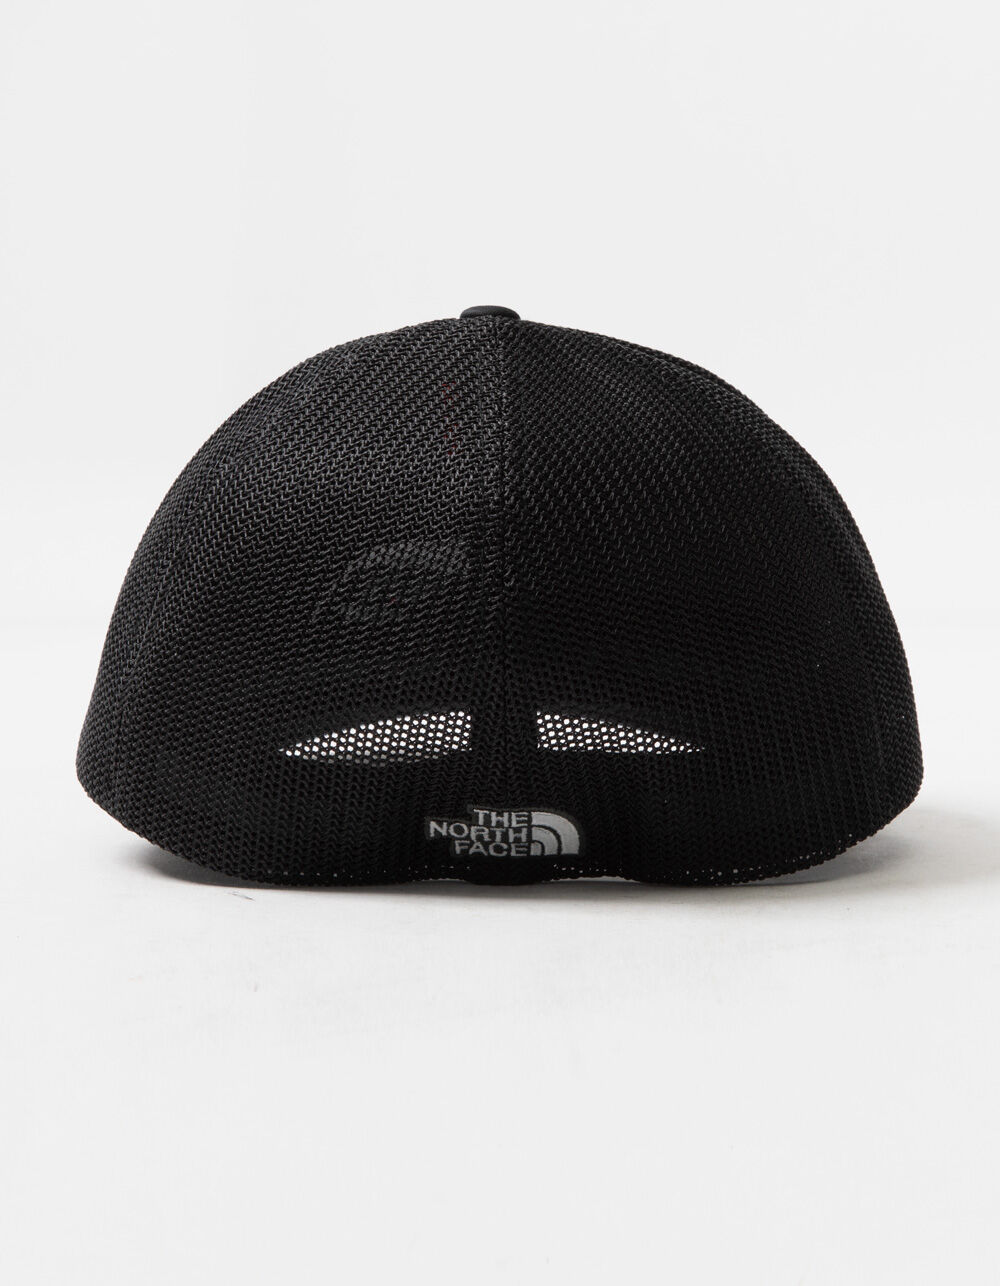 THE NORTH FACE Fitted Trucker Hat | Tillys